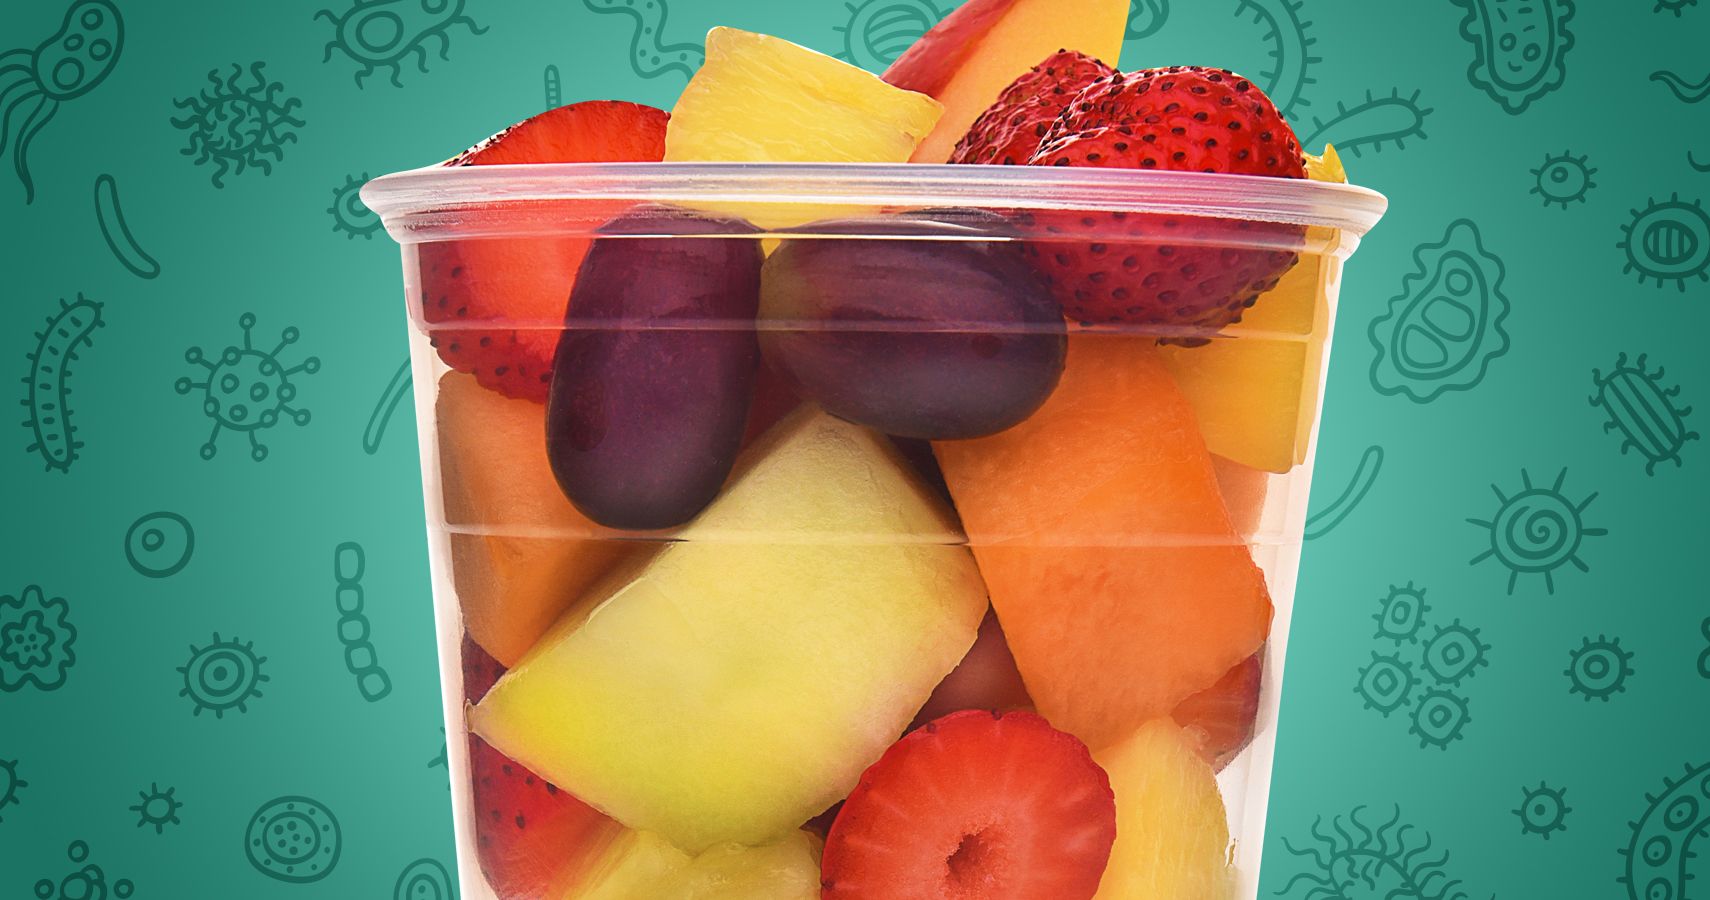 Recall On Fruit Sold At Walmart & Other Locations